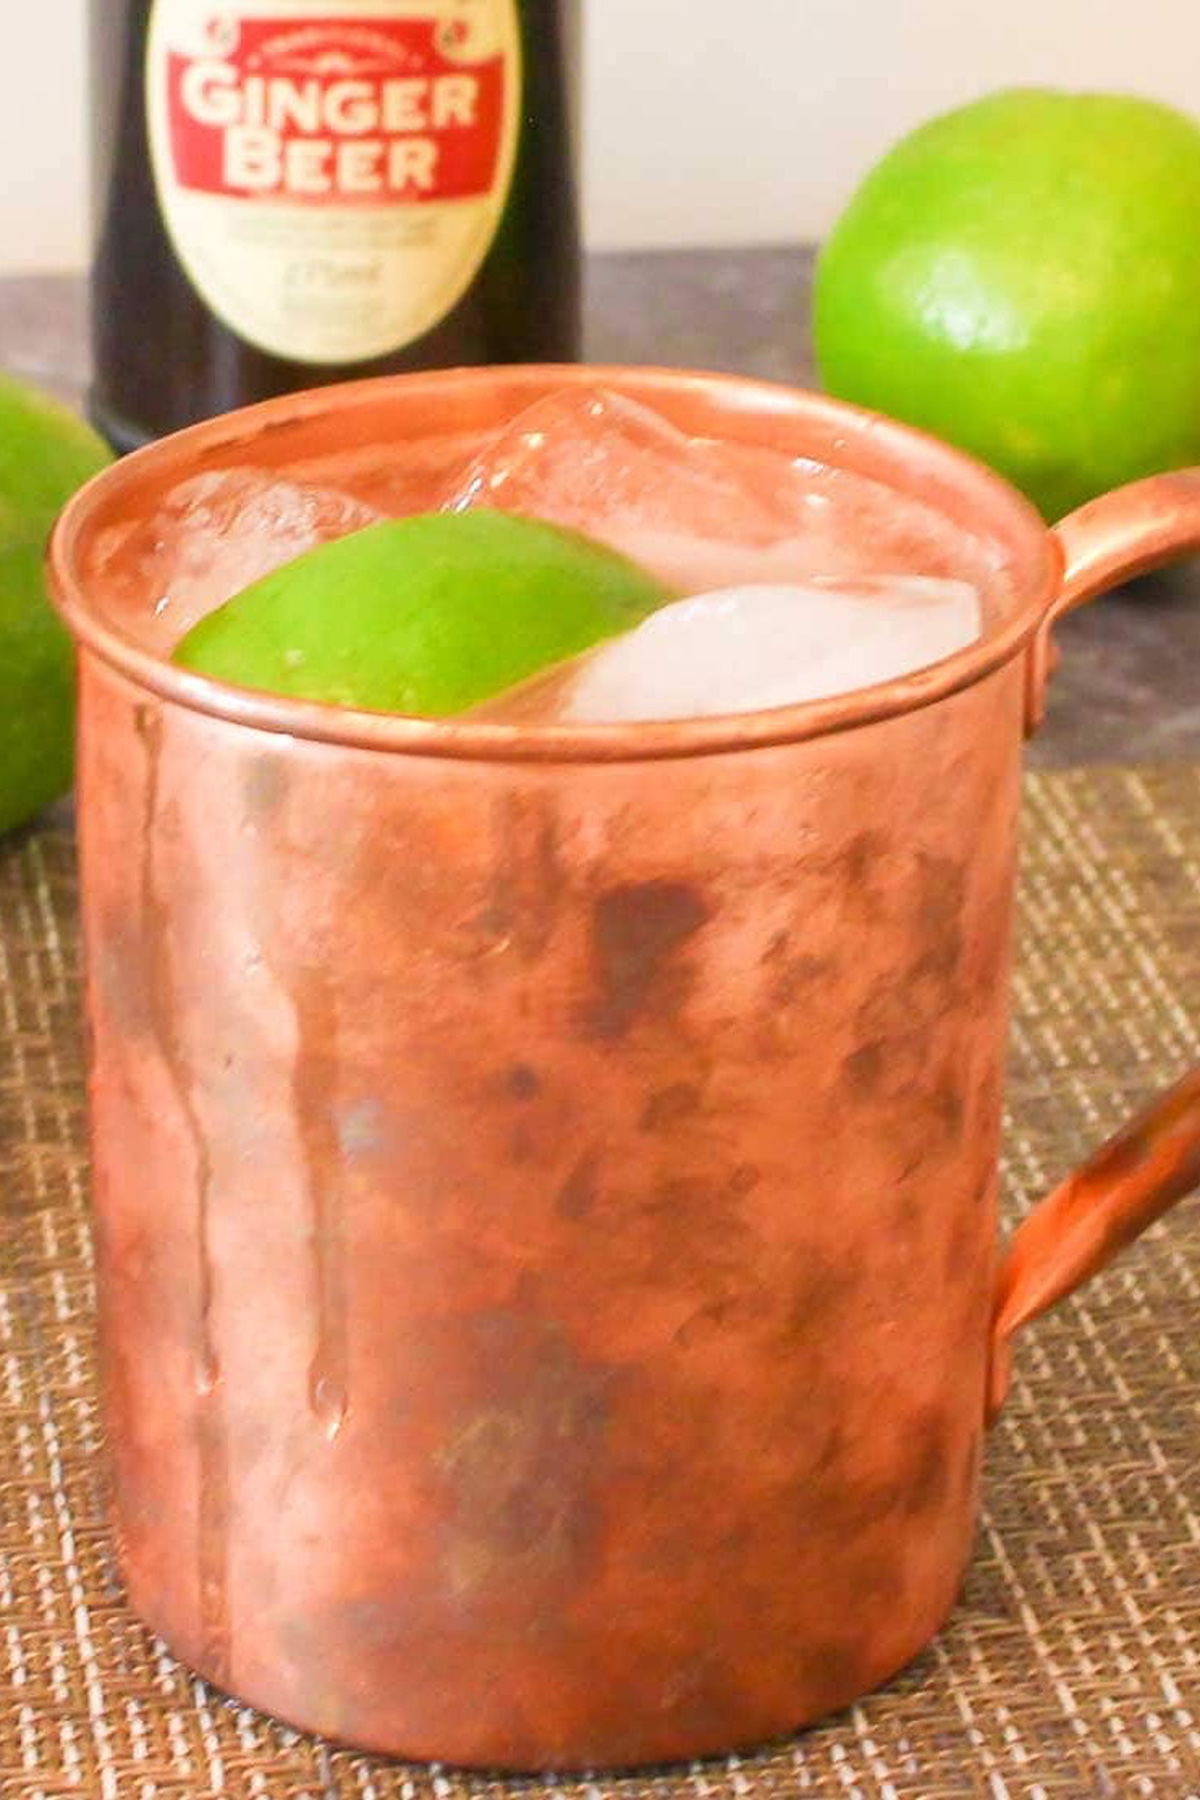 Copper cup with a Moscow Mule with bitters.